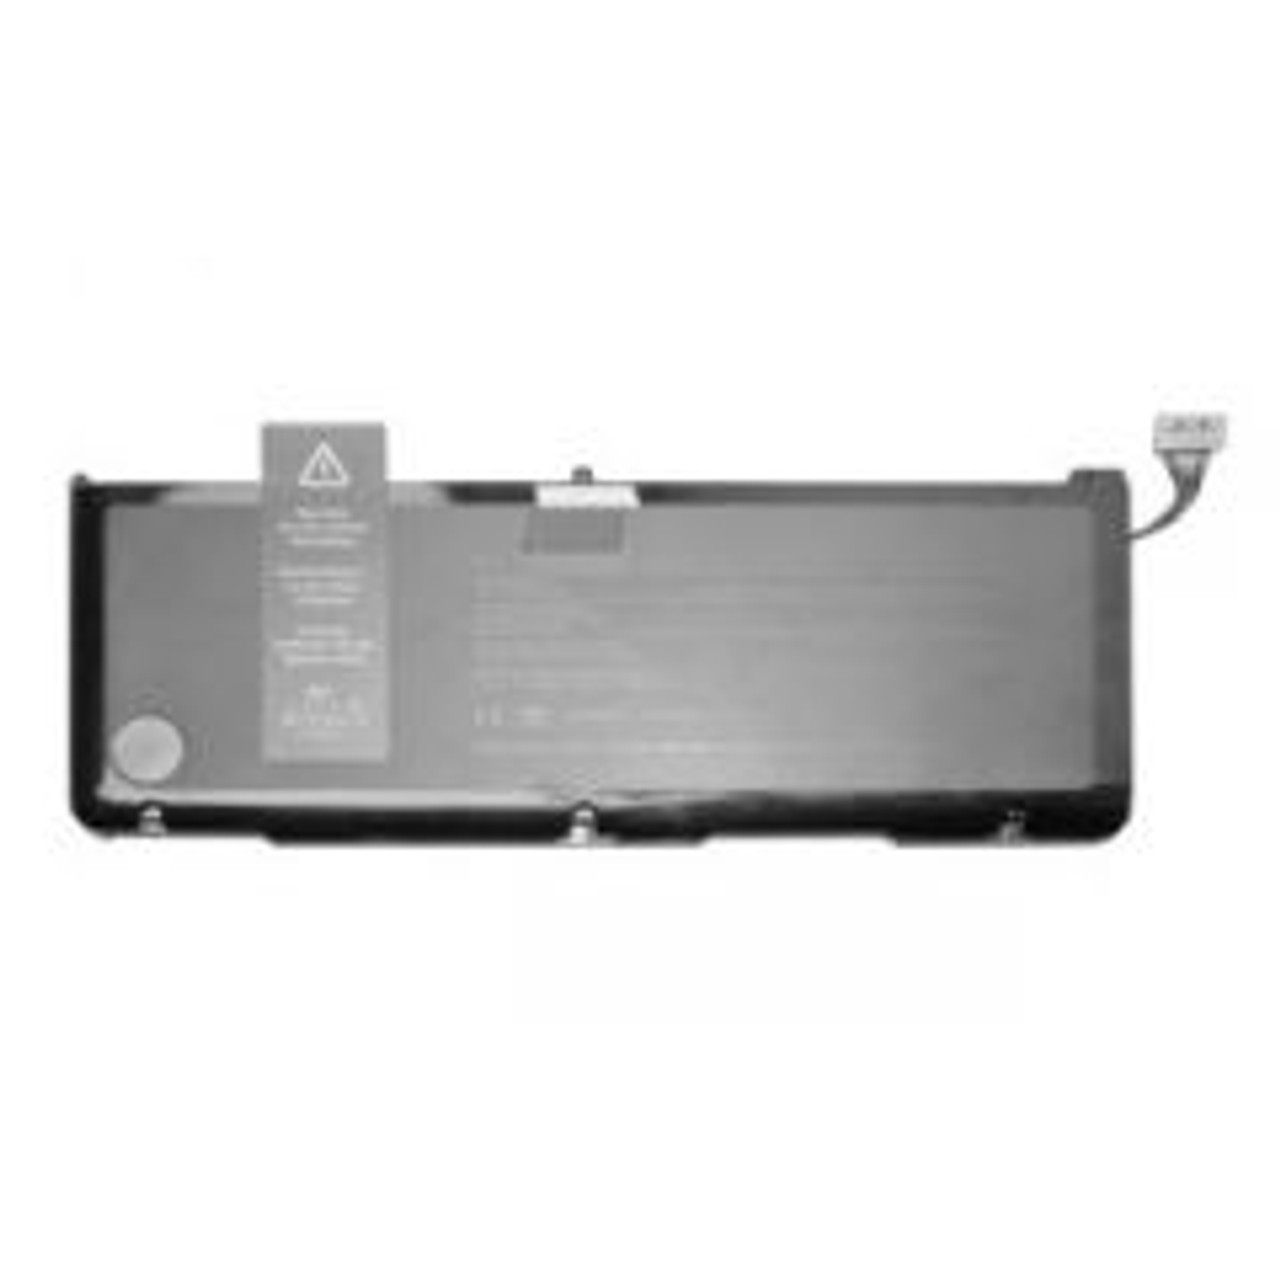 661-5960 | Apple | 10.95V Lithium Ion Laptop Battery For Macbook Pro 17